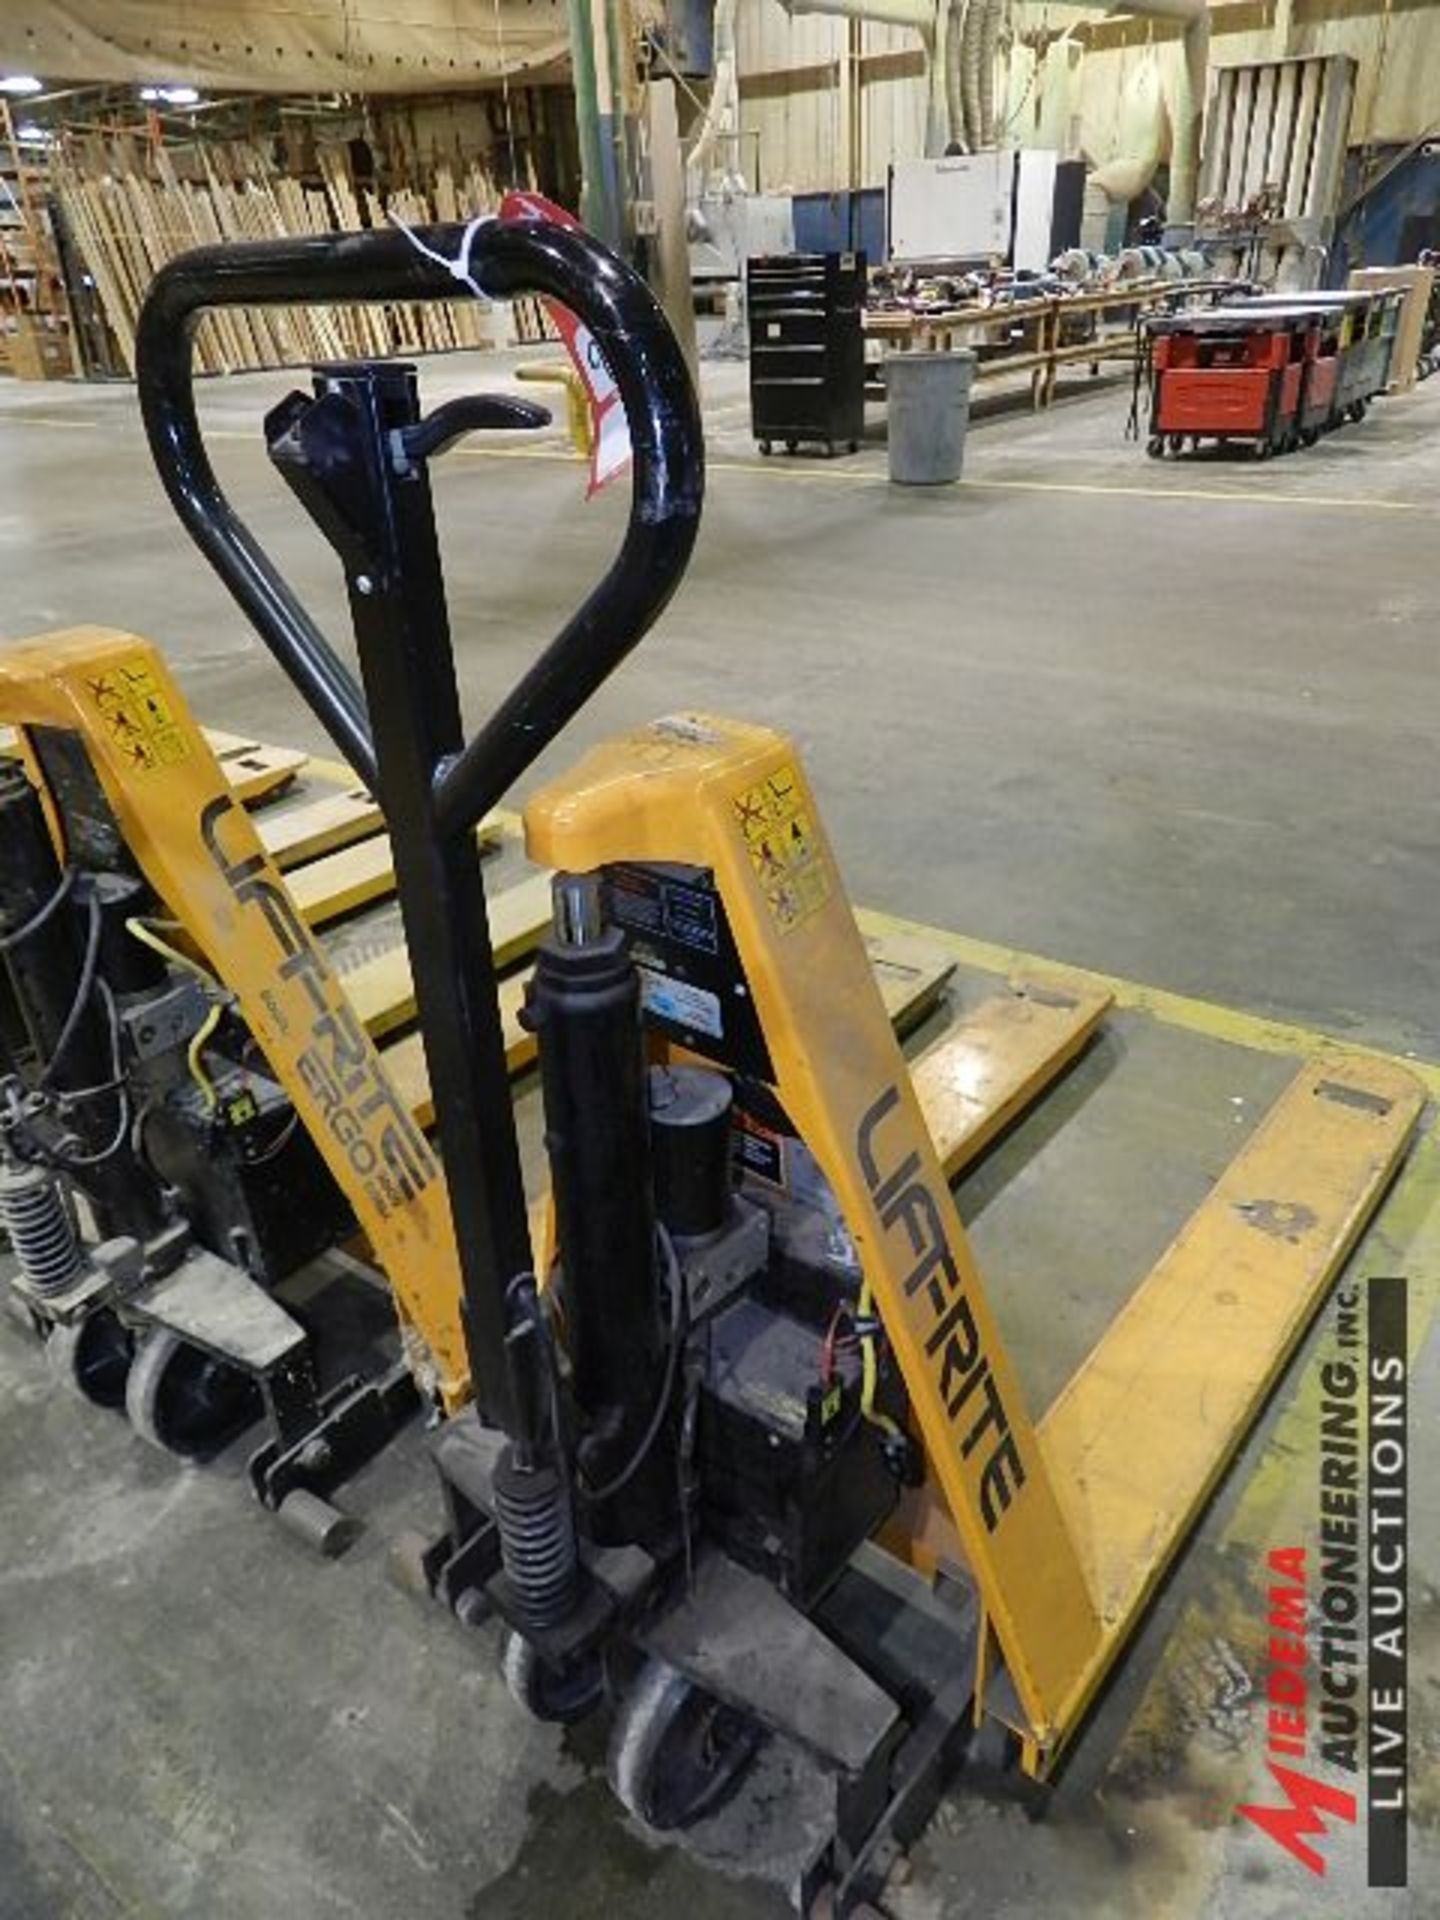 LIFT-RITE RG30E270048 BATTERY POWERED PALLET JACK WITH 48" FORKS, 3000 LB CAPACITY - Image 2 of 3